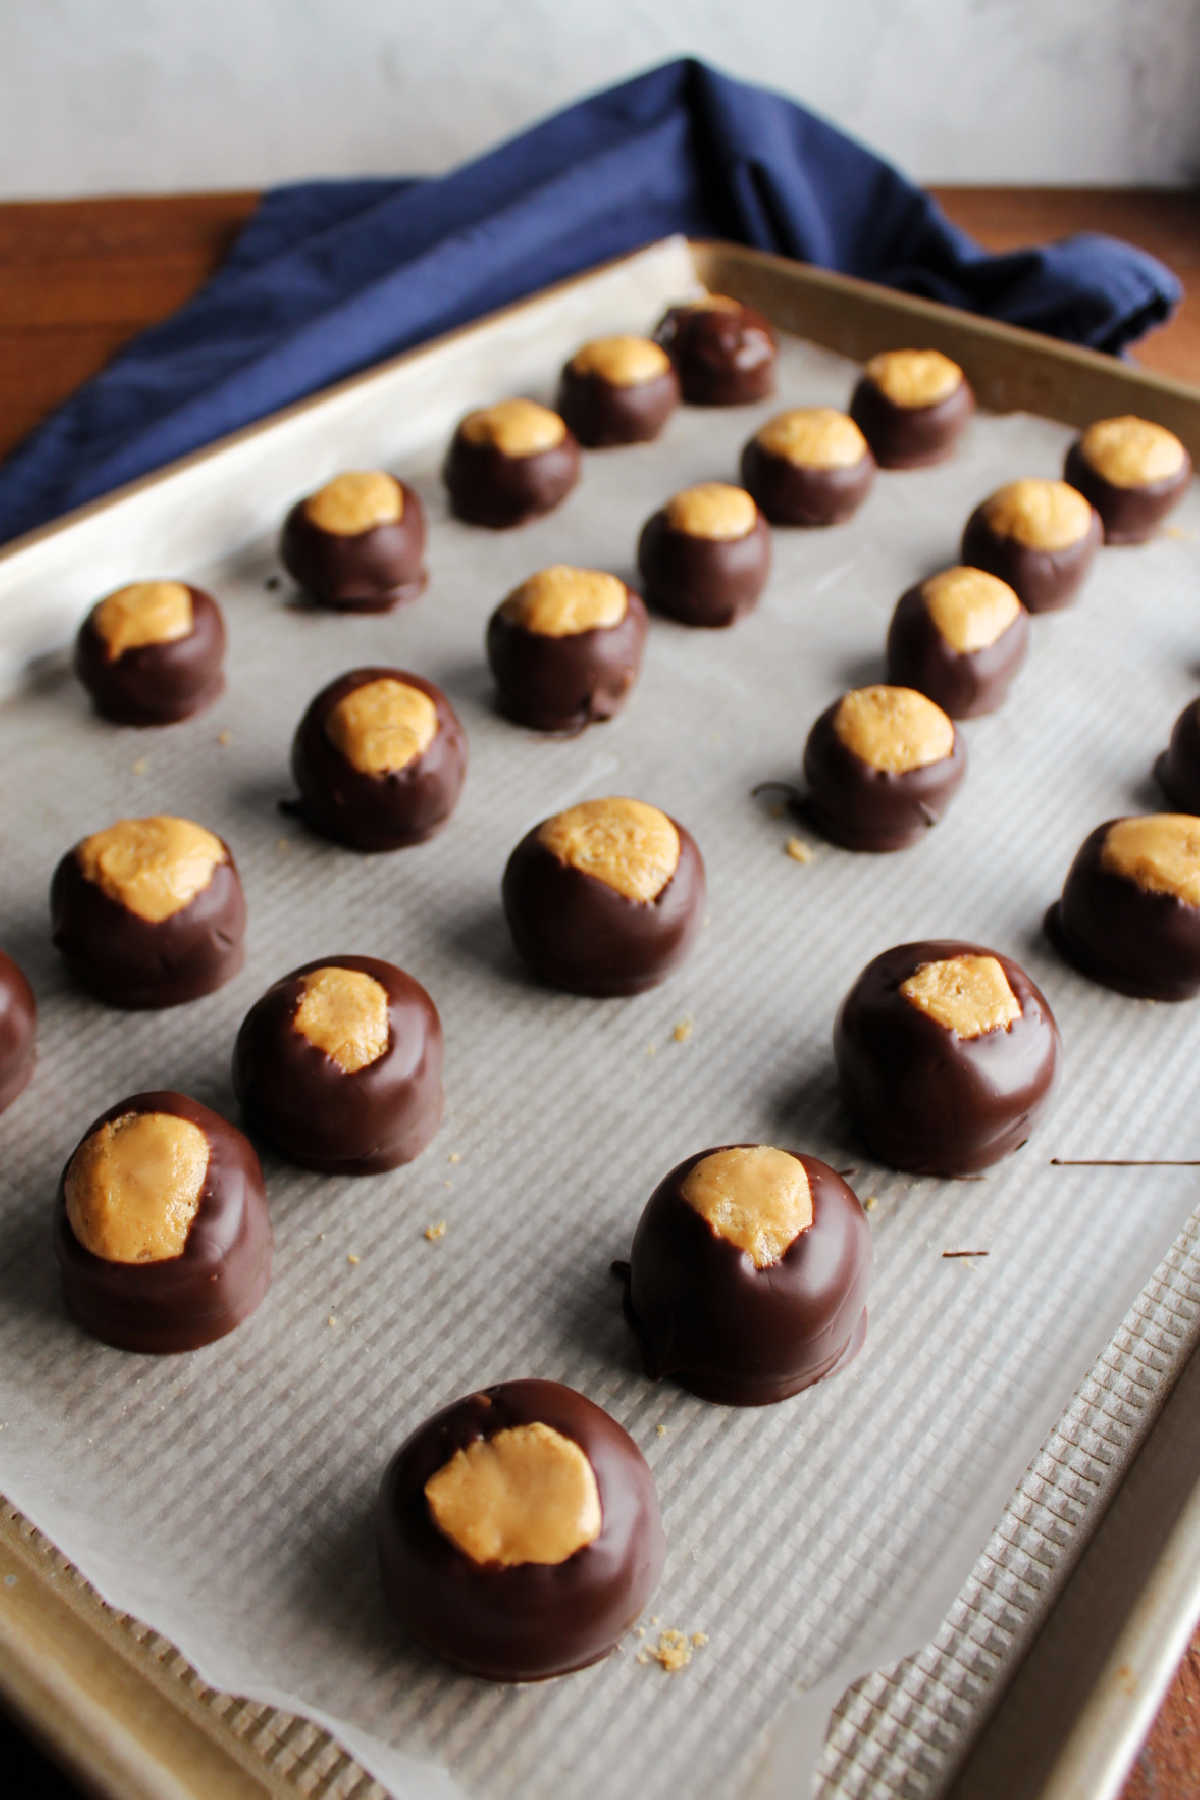 Tray of chocolate dipped peanut butter balls setting up.